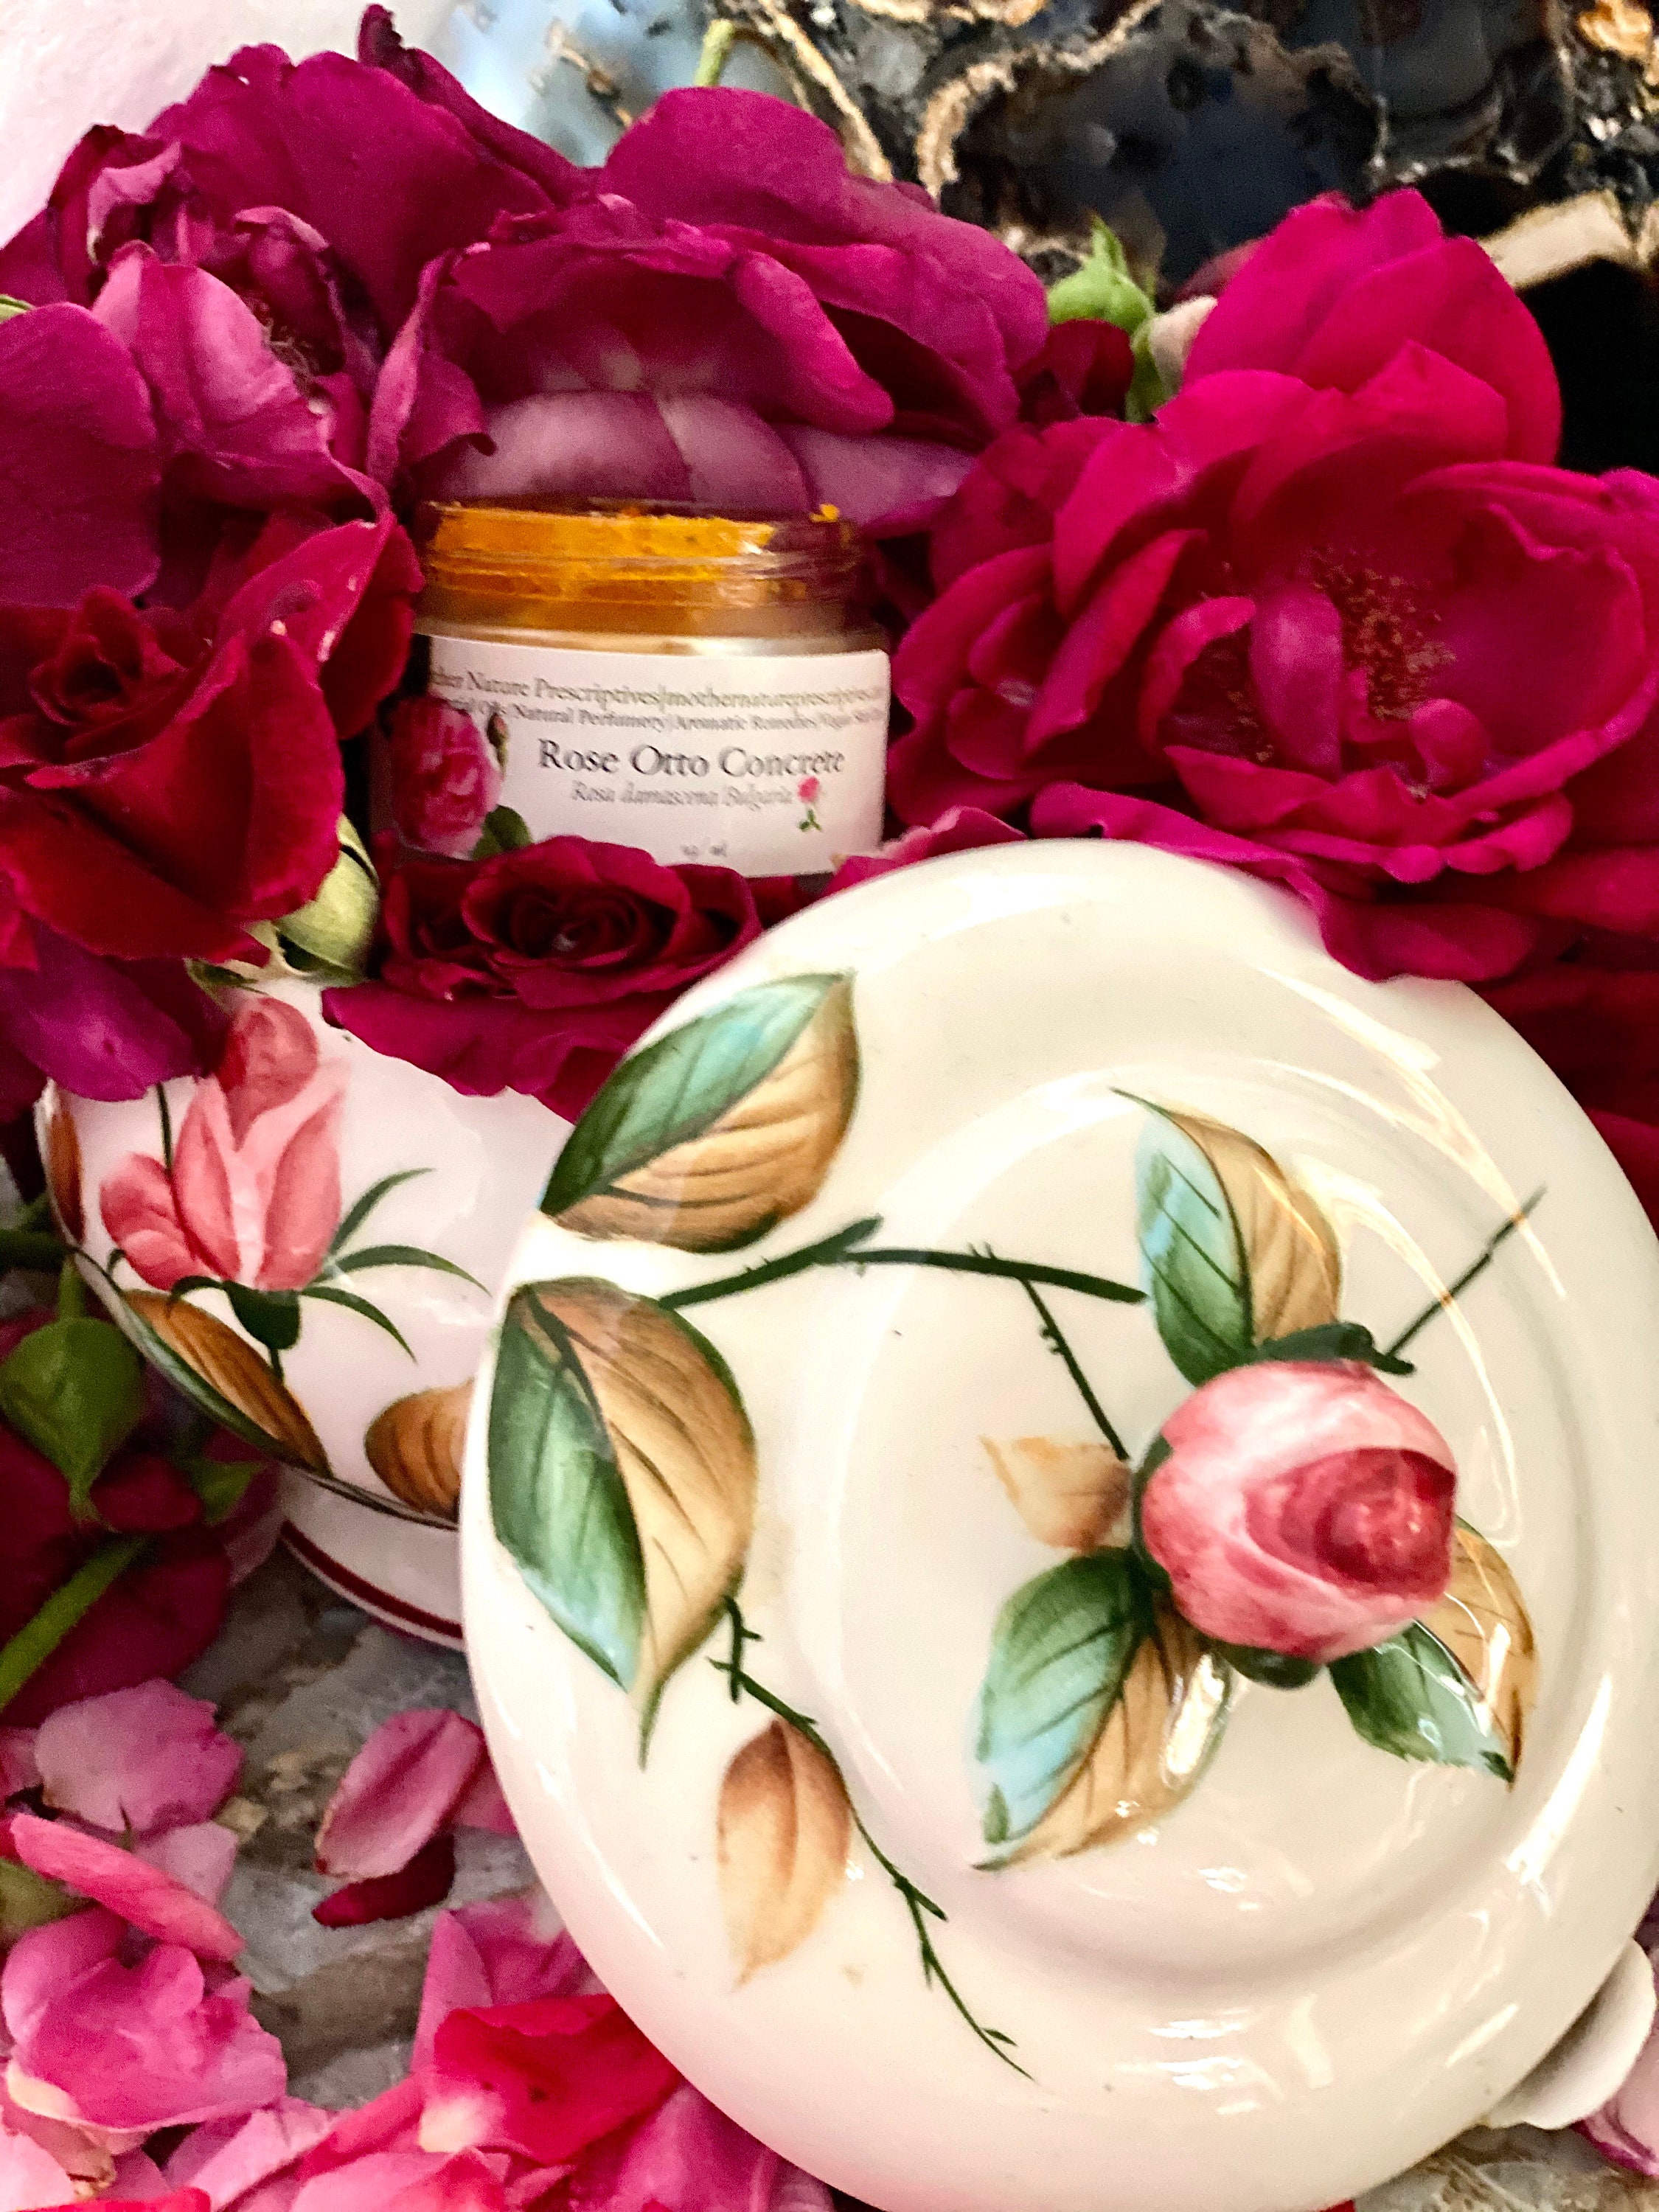 Rose Concrete Rosa Damascena Bulgaria Valley of Roses Cold Extraction Flower  Concrete Soliflore Fragrant Queen of Flowers Solid Perfume 